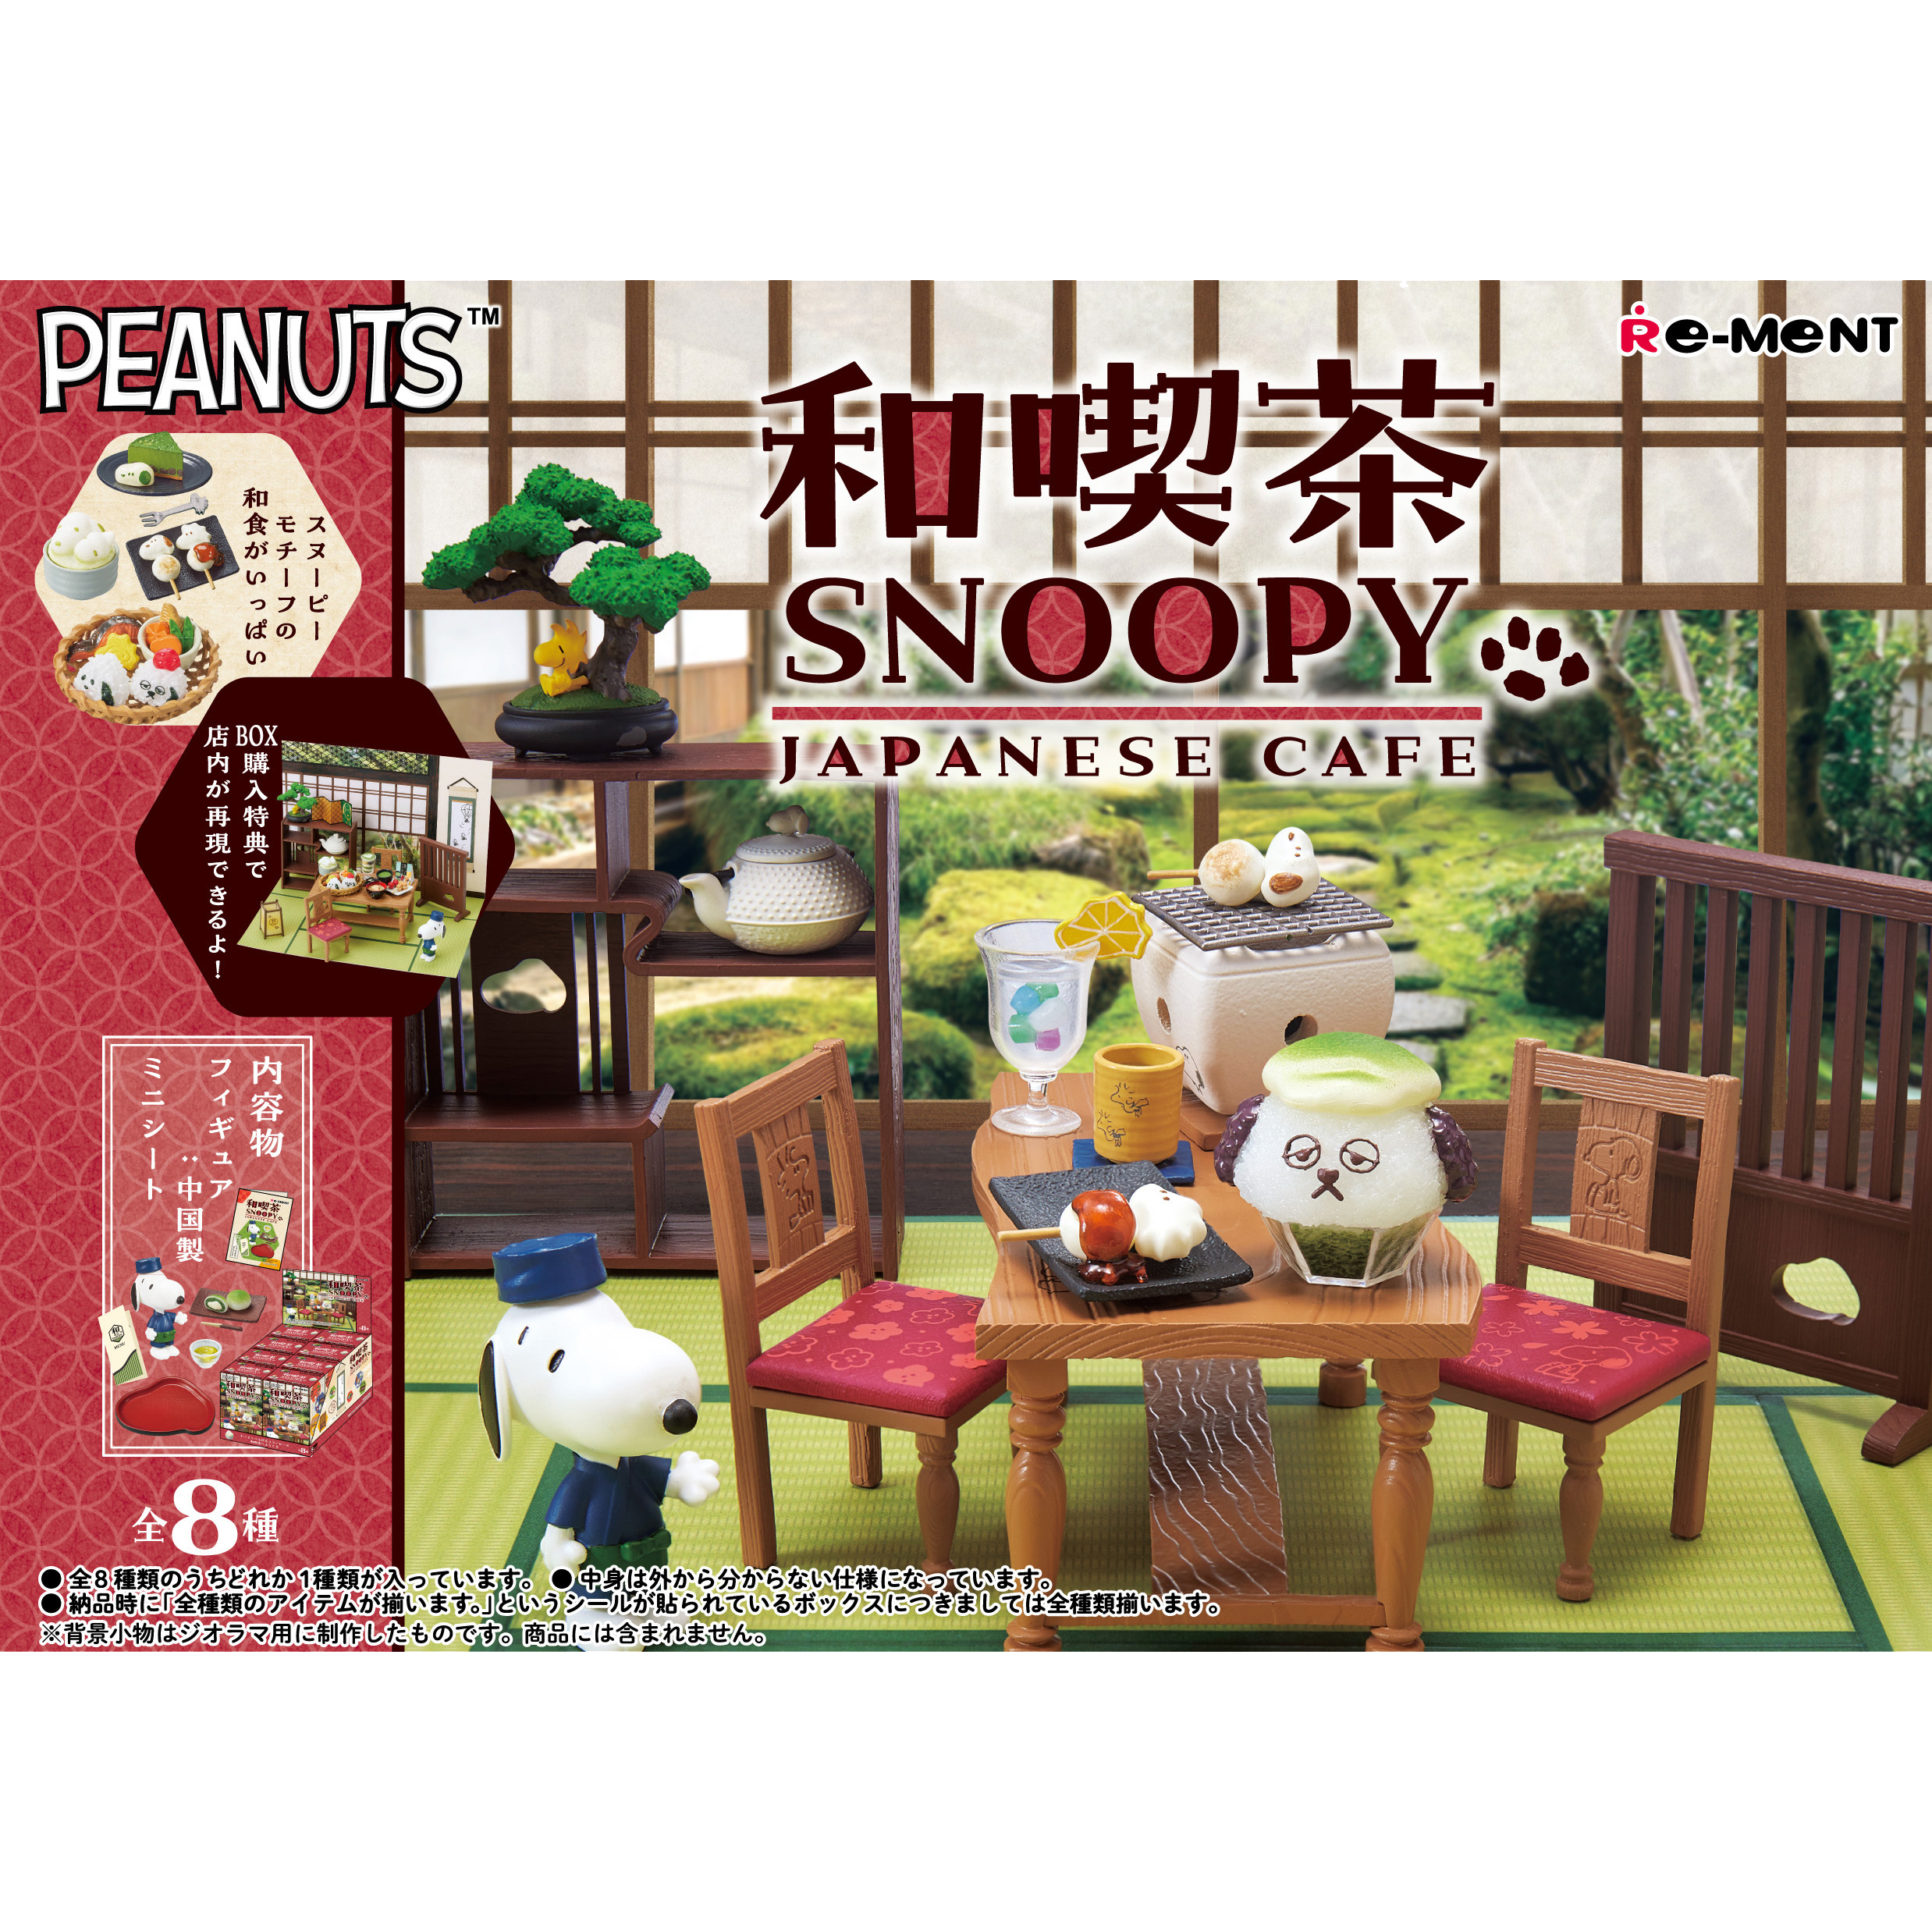 Re-Ment - Peanuts - Snoopy Japanese Cafe (Box of 8) - Marvelous Toys